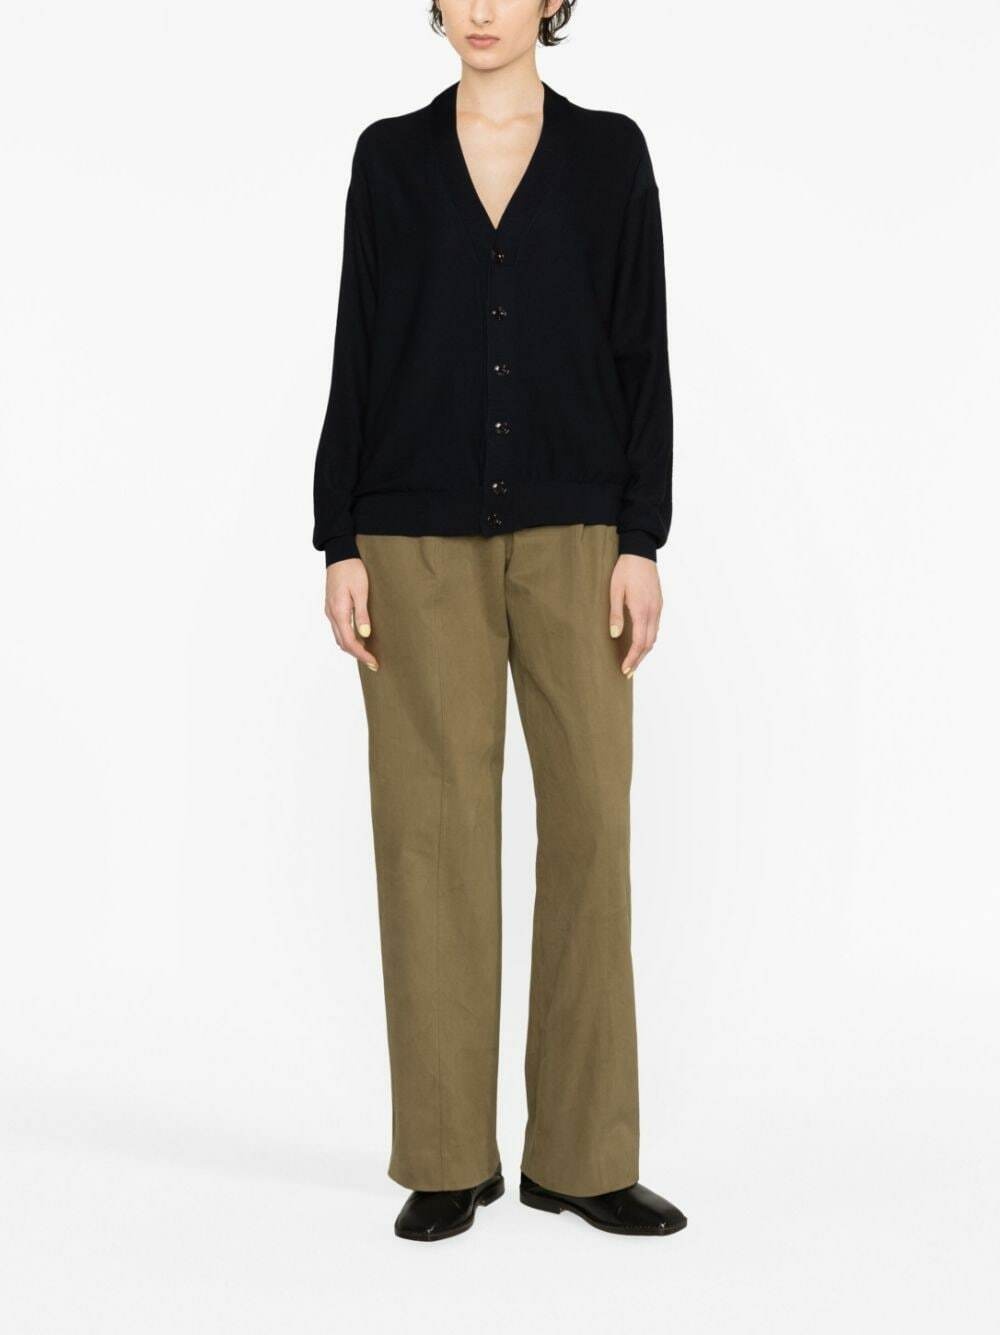 LEMAIRE - Wool Blend Cardigan Lemaire